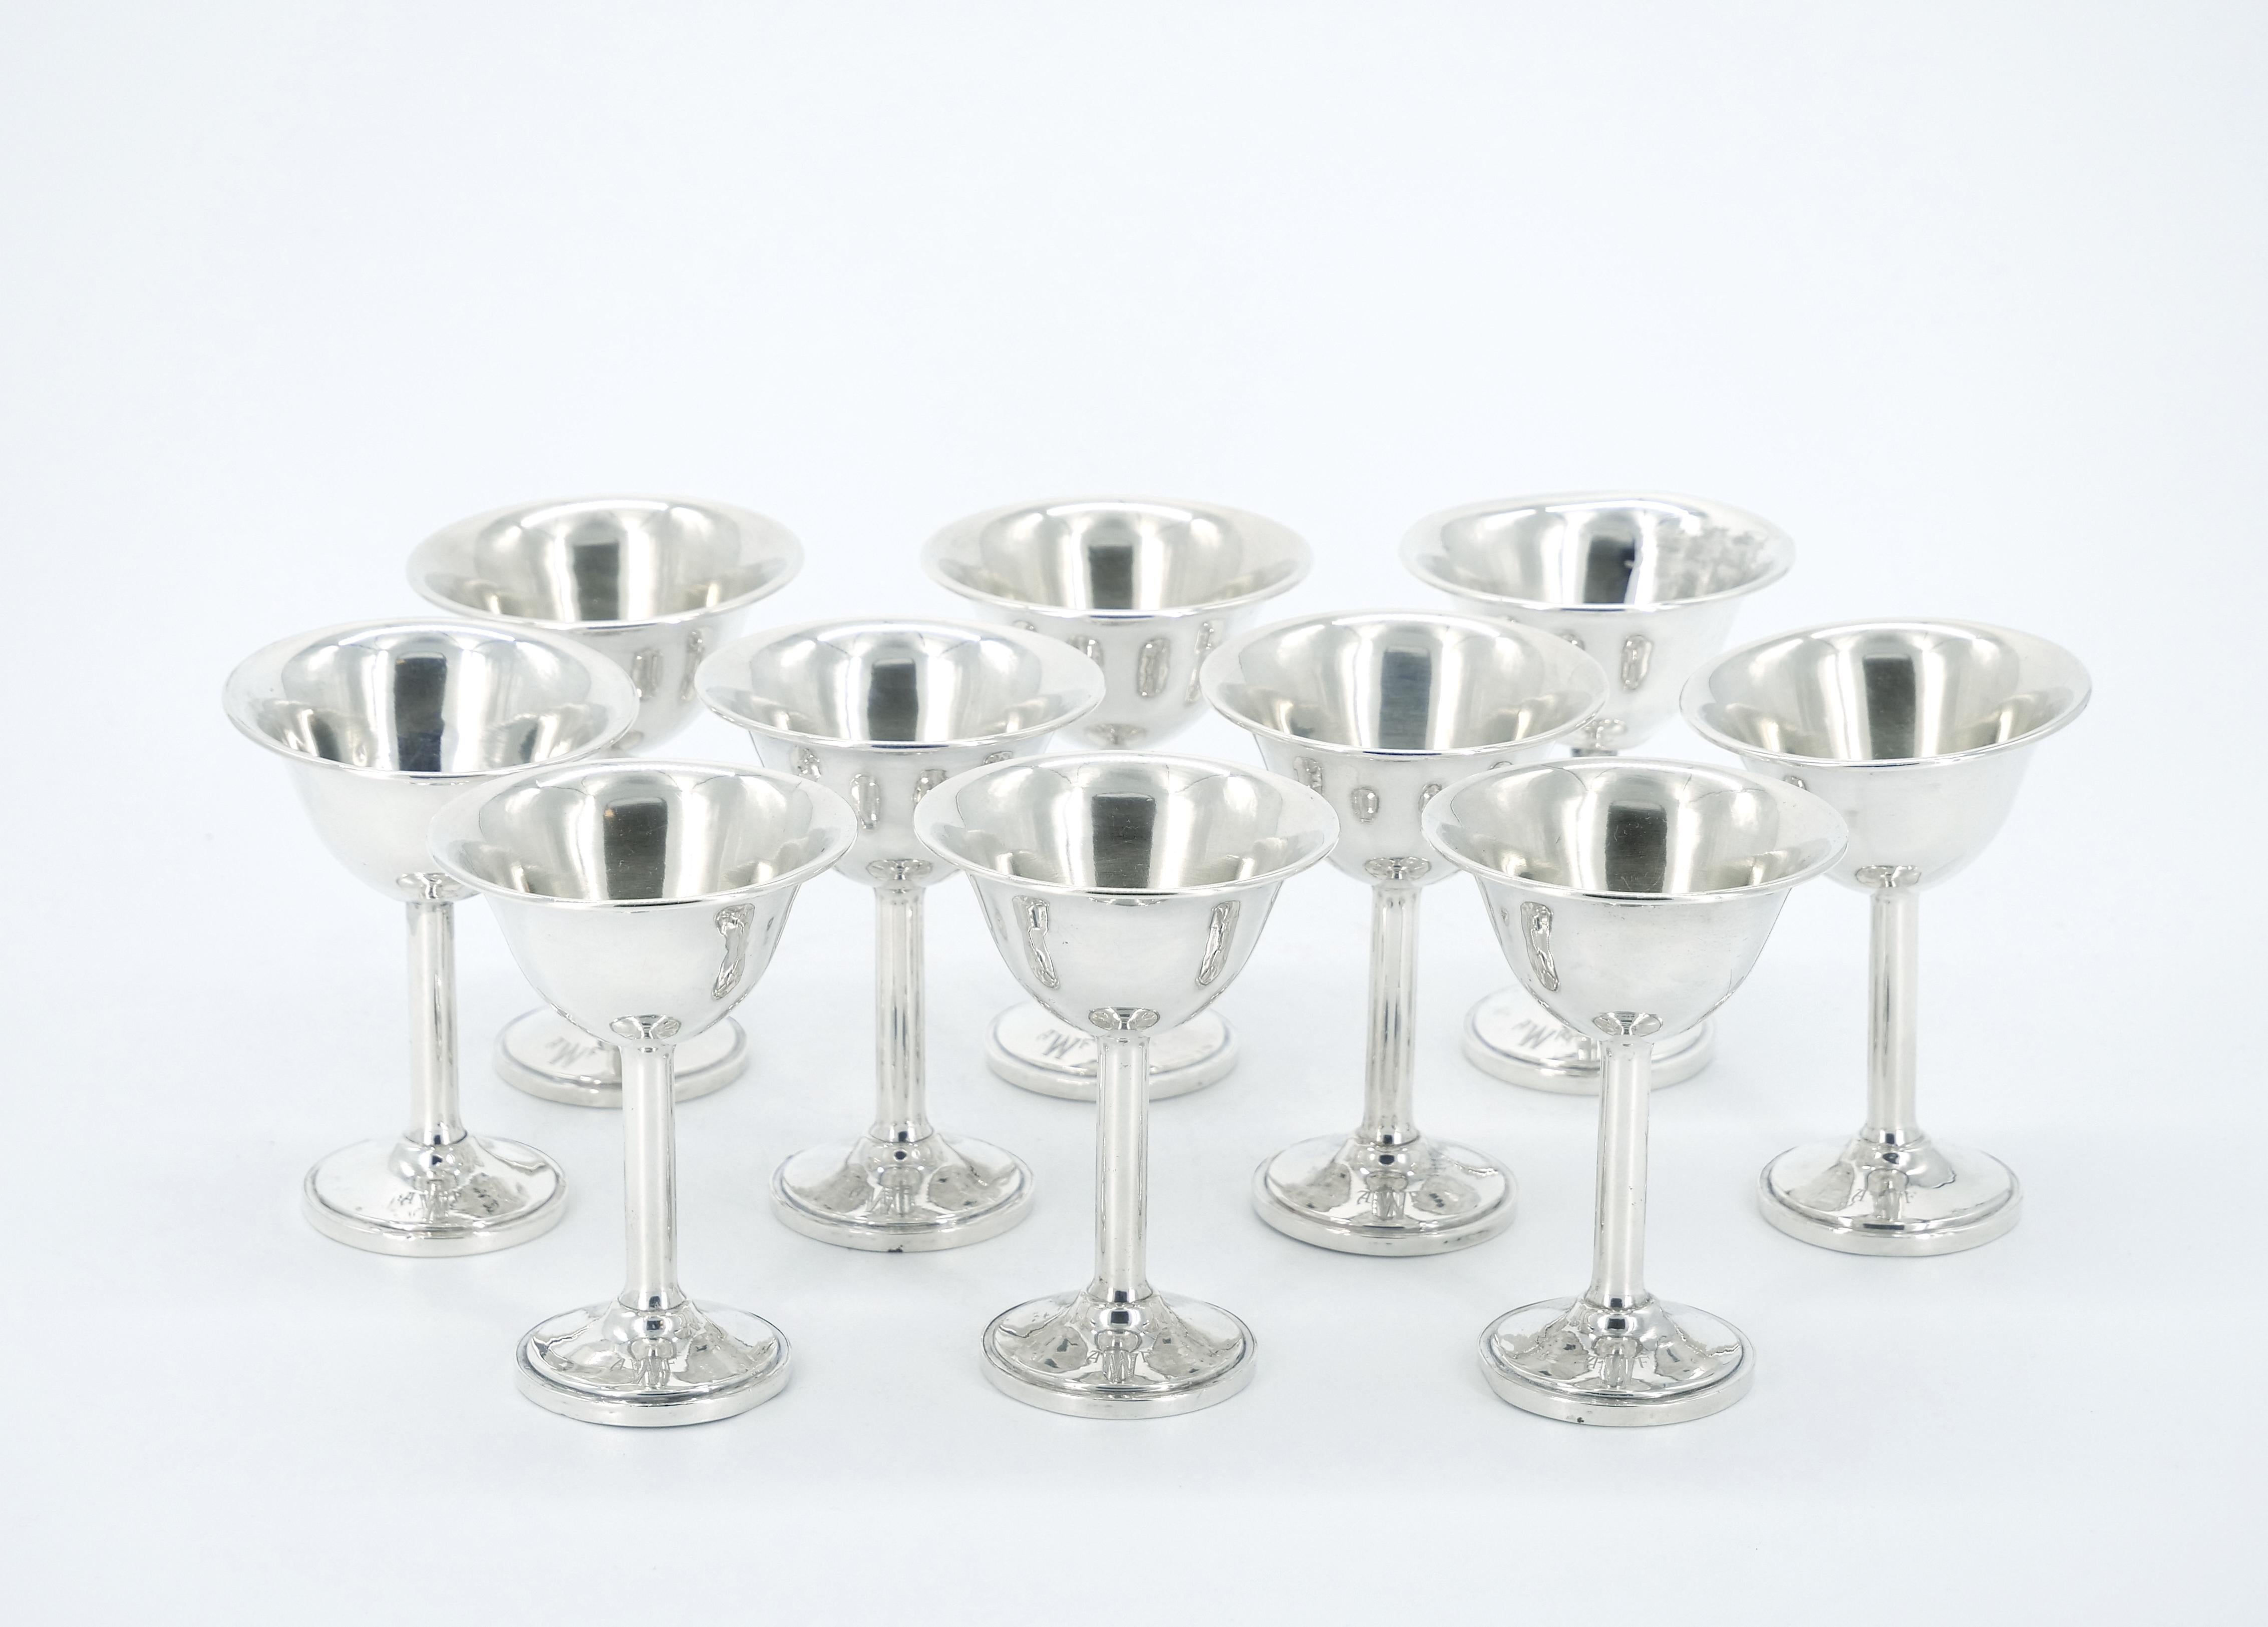 
Indulge in the timeless luxury of this early 20th century American sterling silver barware / tableware cordial's service, designed to cater to the refined tastes of ten people. Immerse yourself in the allure of this exceptional collection,